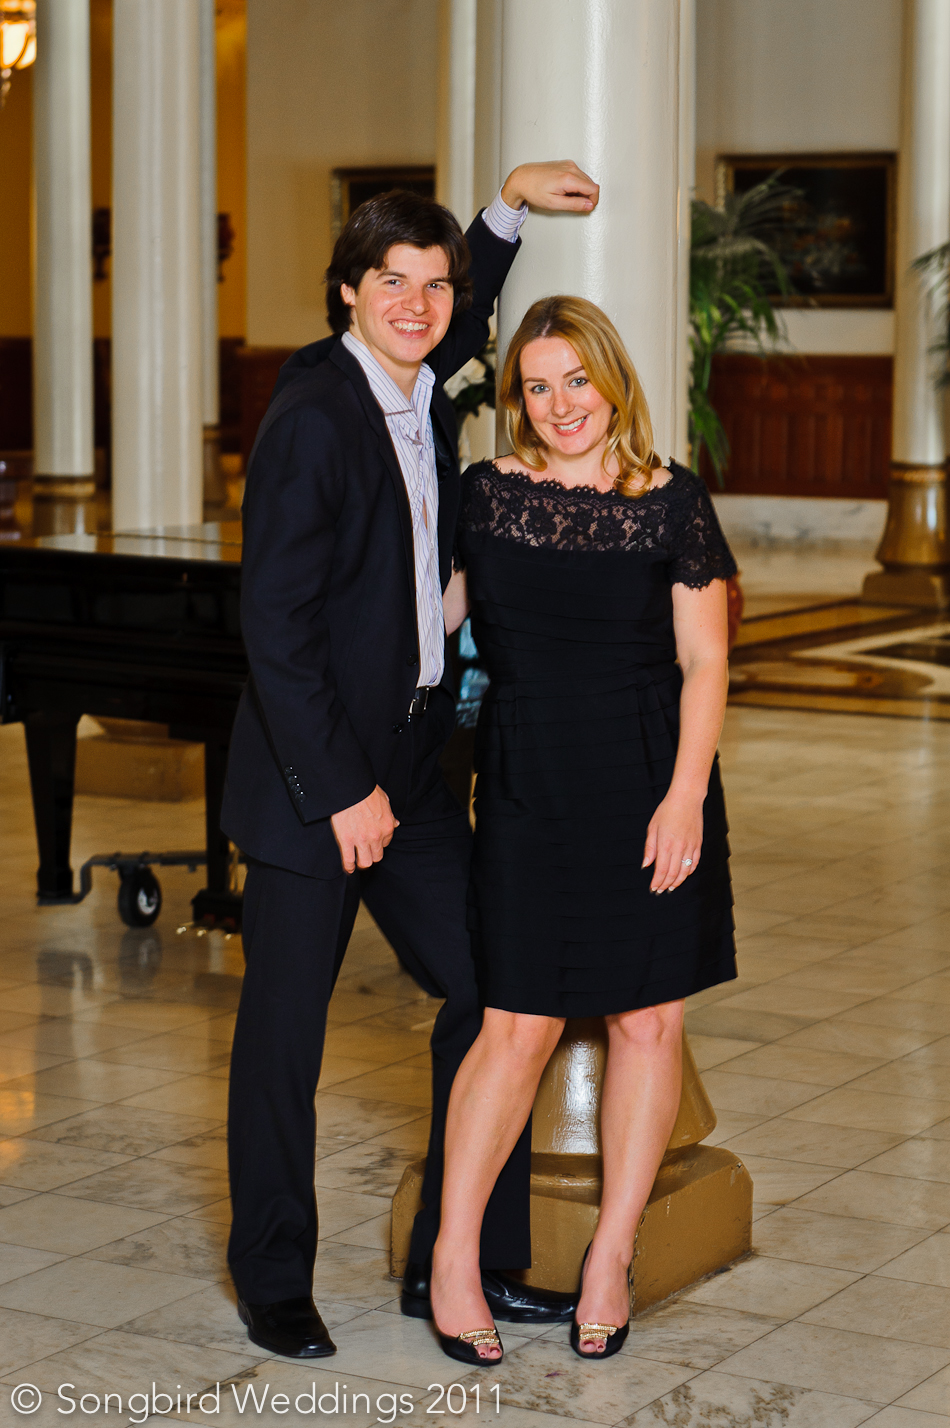 Songbird Weddings Engagement session at the Driskill Hotel